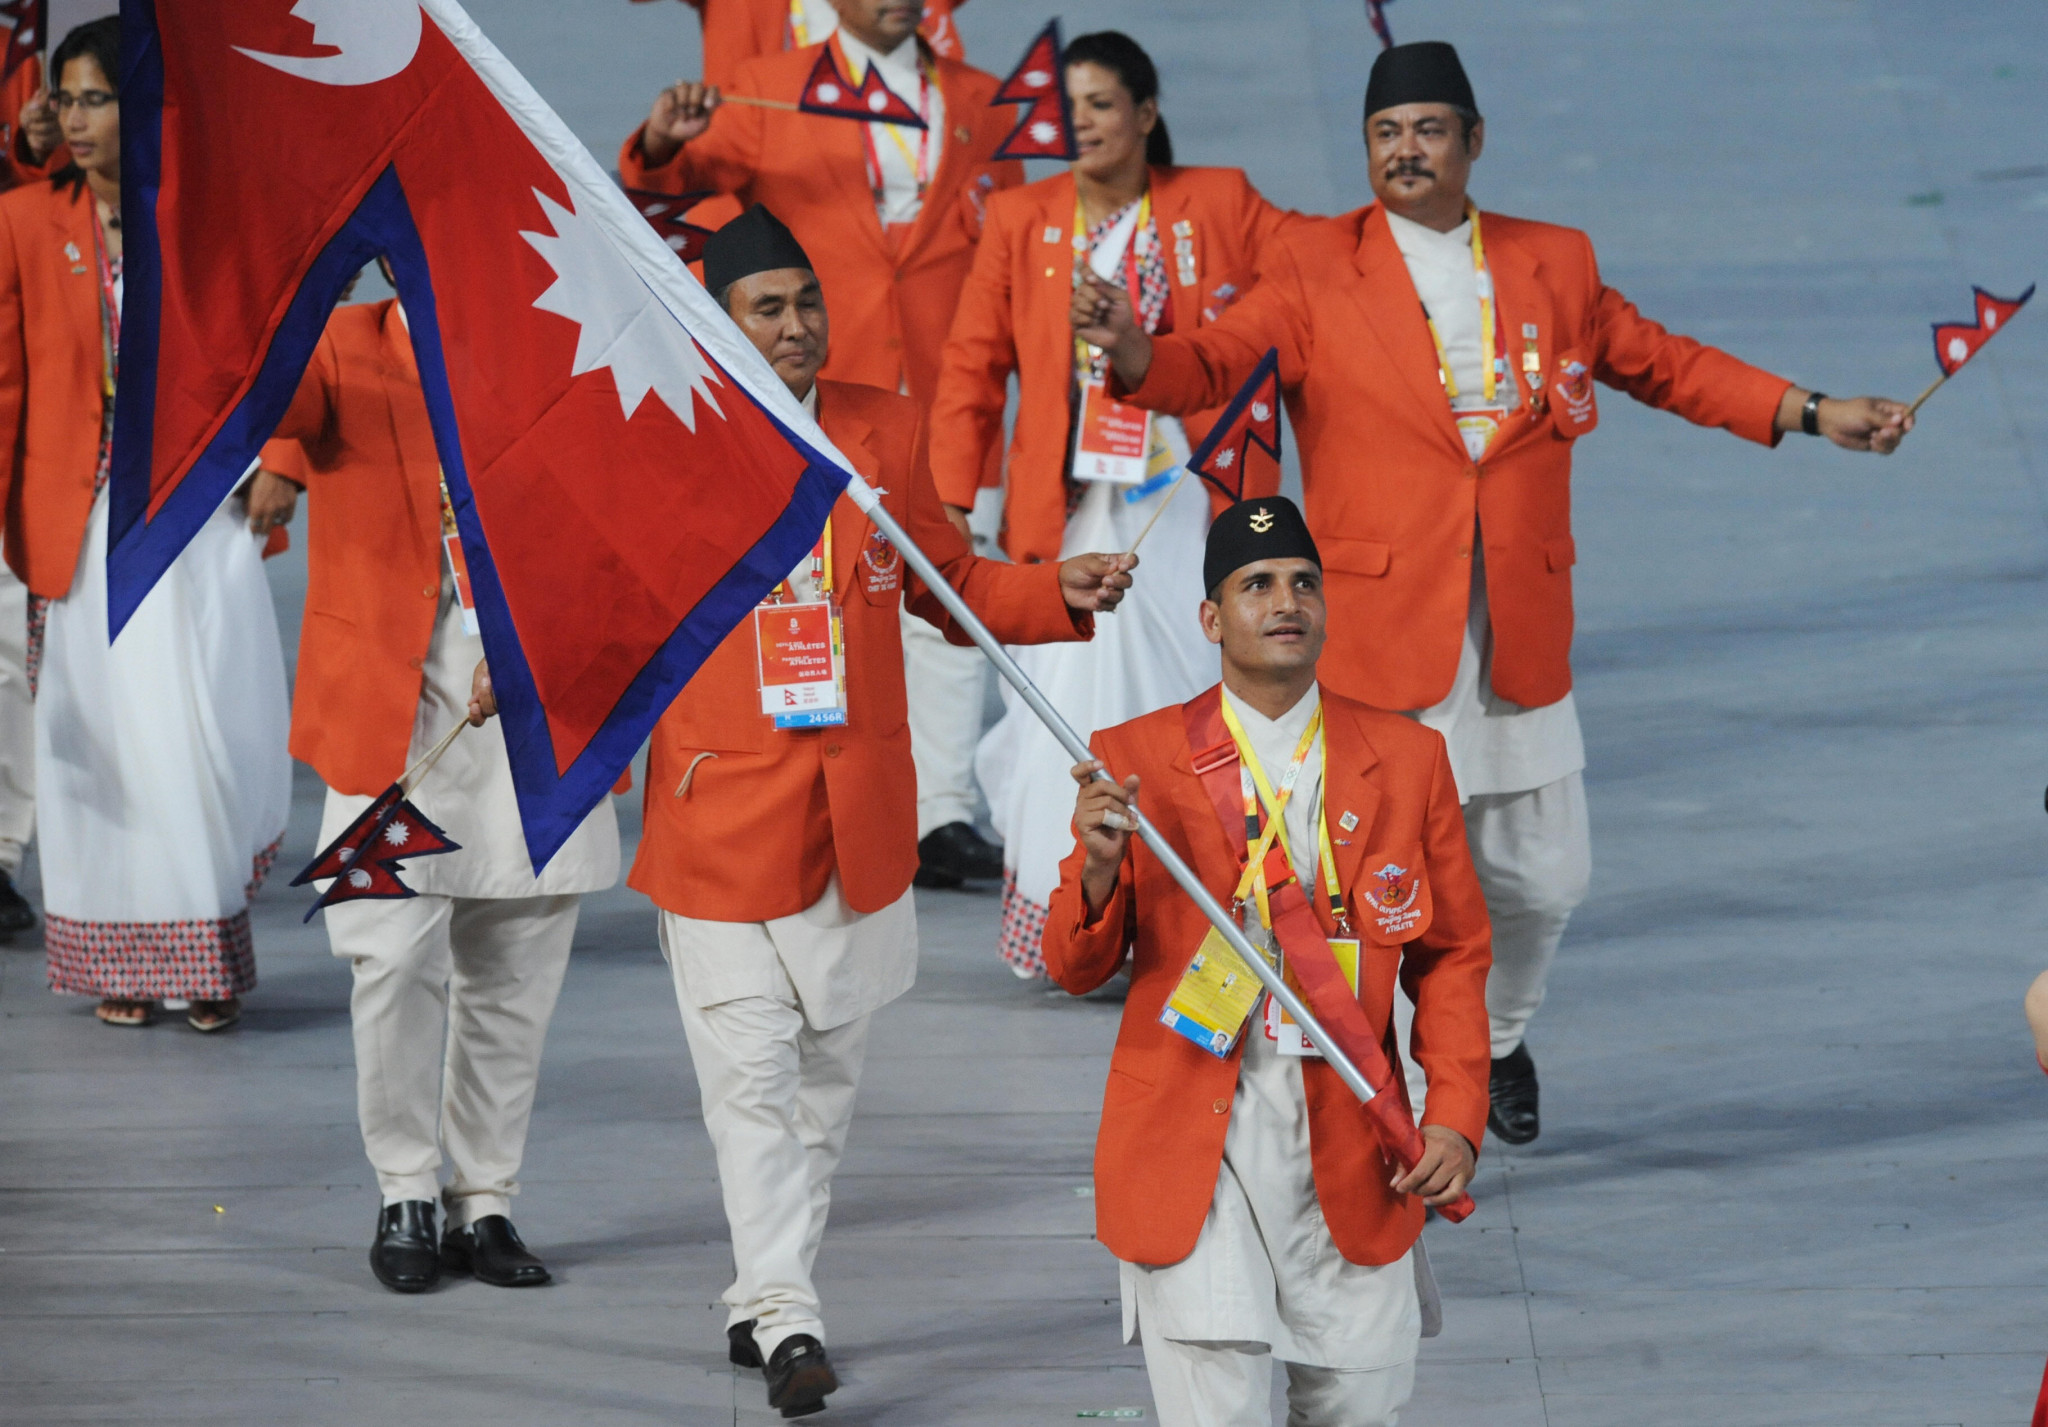 Beijing 2008 flagbearer included on 12-person judging panel for Nepal NOC Awards